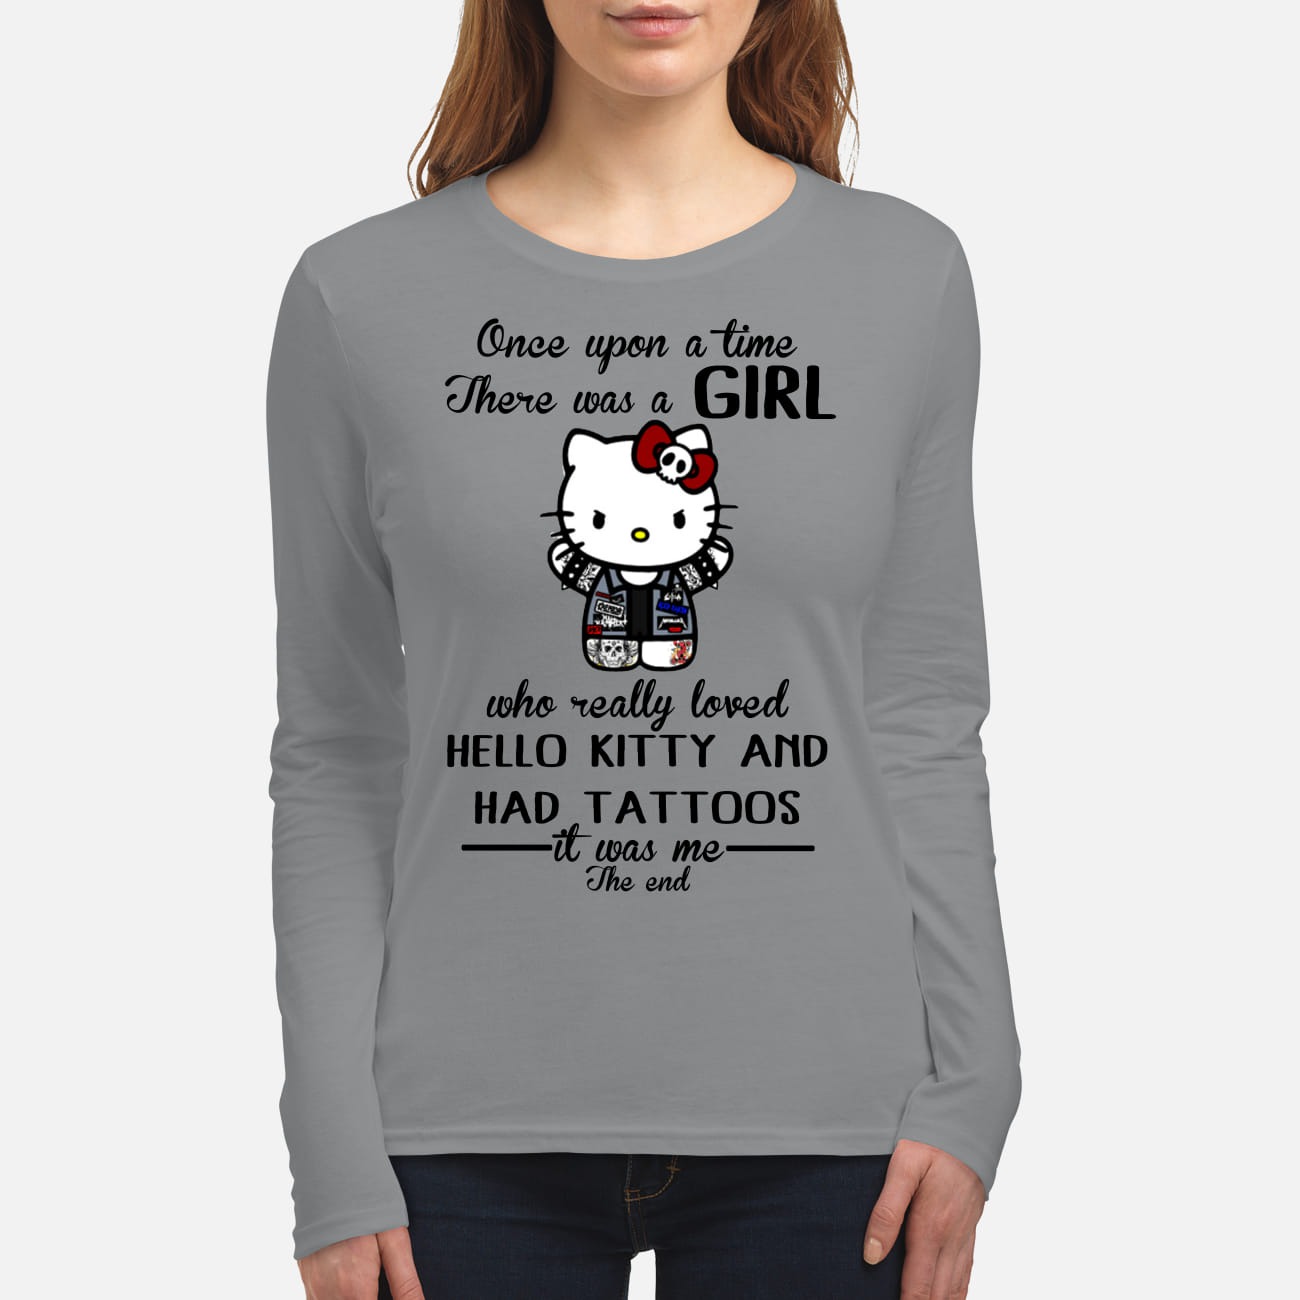 There was a girl who loved hello kitty and had tattoos women's long sleeved shirt